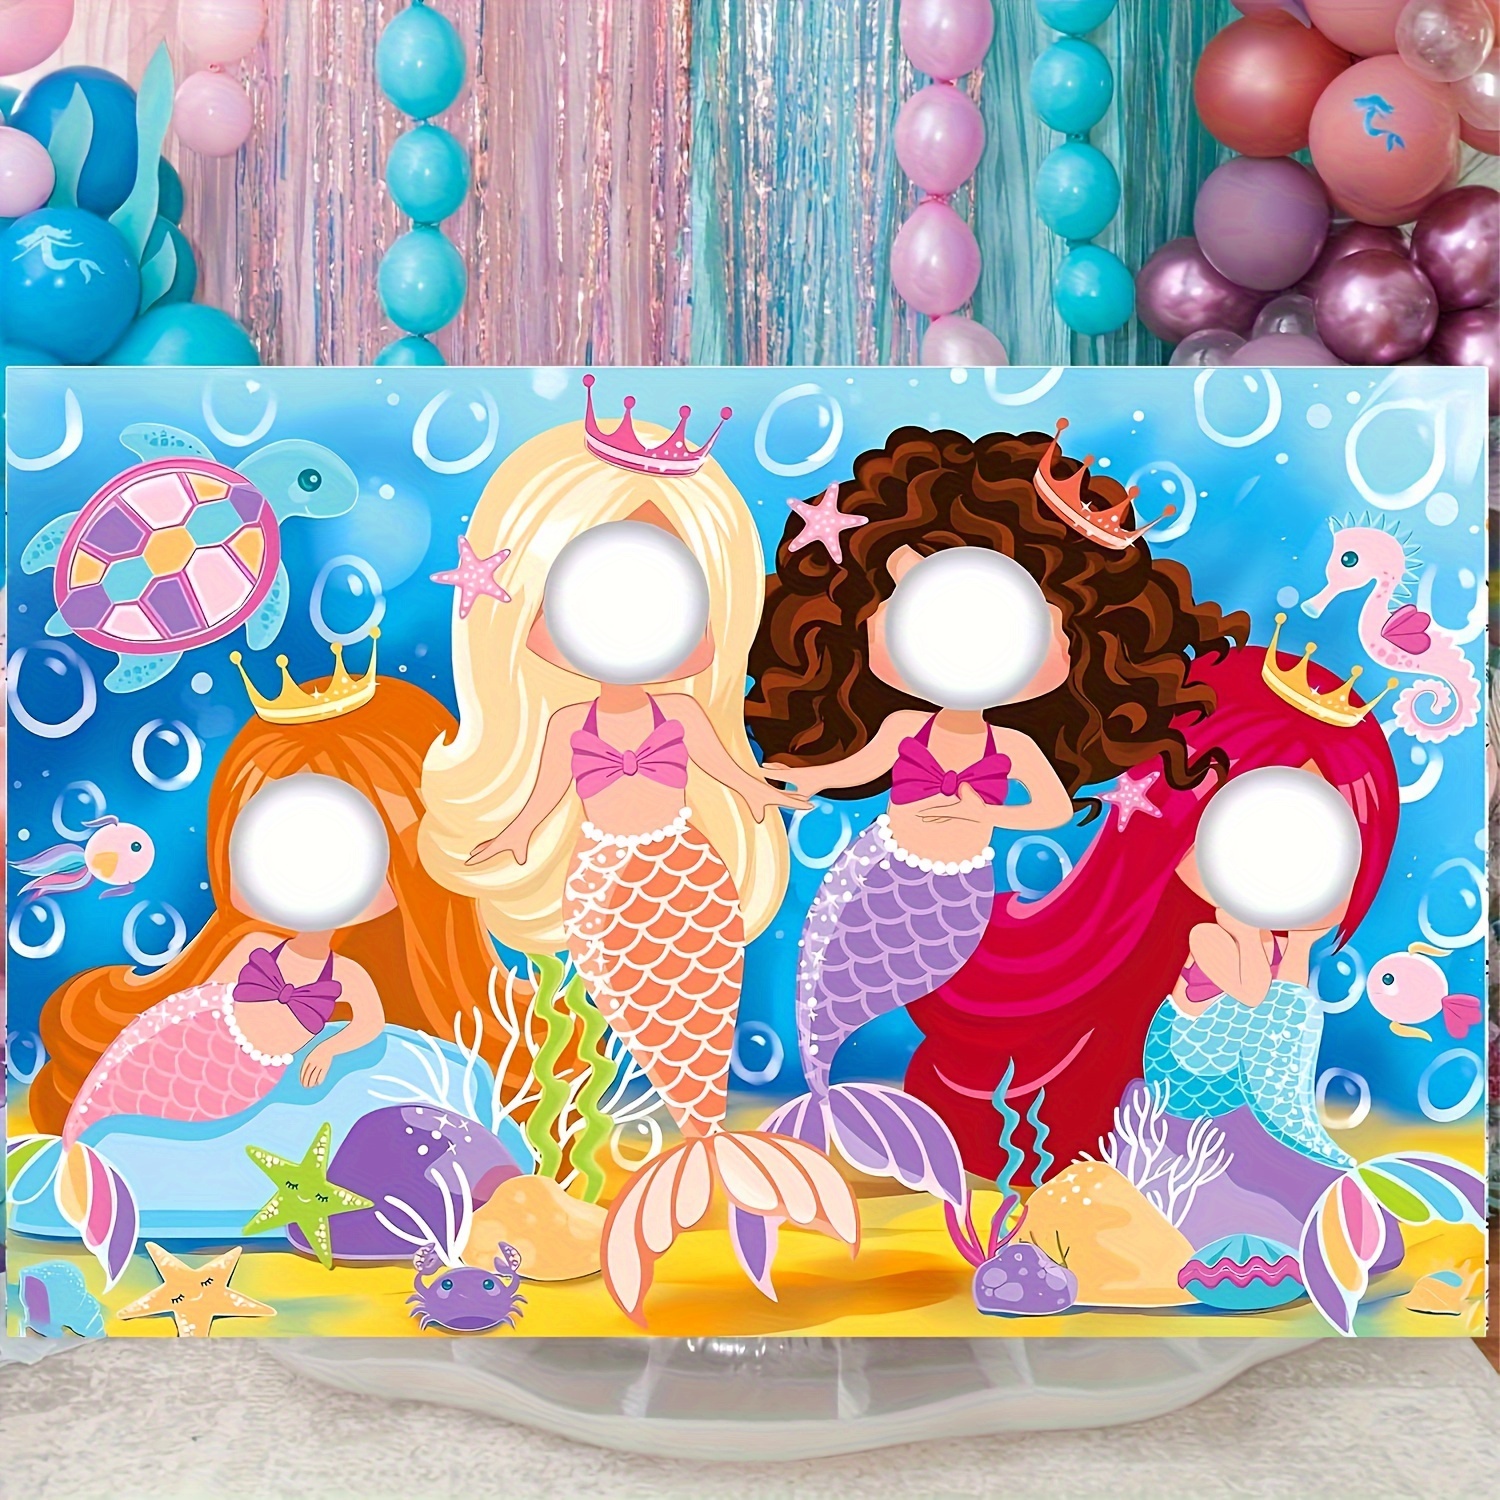 

Mermaid Themed Party Photo Booth Backdrop, Vinyl Mermaid Princess Cutout Stand-in Prop For Birthday And Event Decoration - No Electricity Required